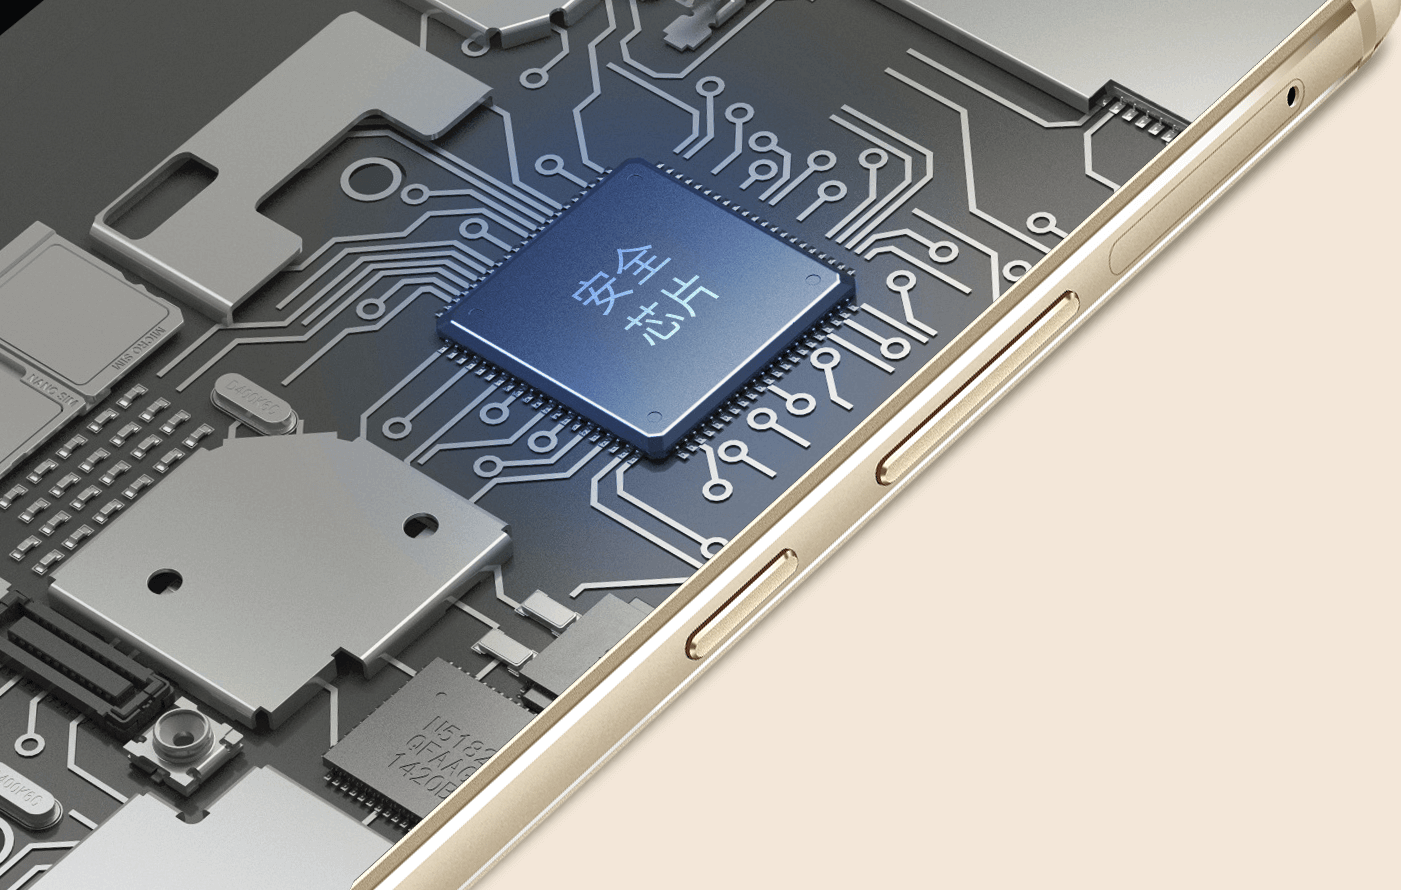 The secure chip is the Gionee M6 and M6 Plus' defining feature - The Gionee M6 and M6 Plus target business professionals with their novel encryption chips